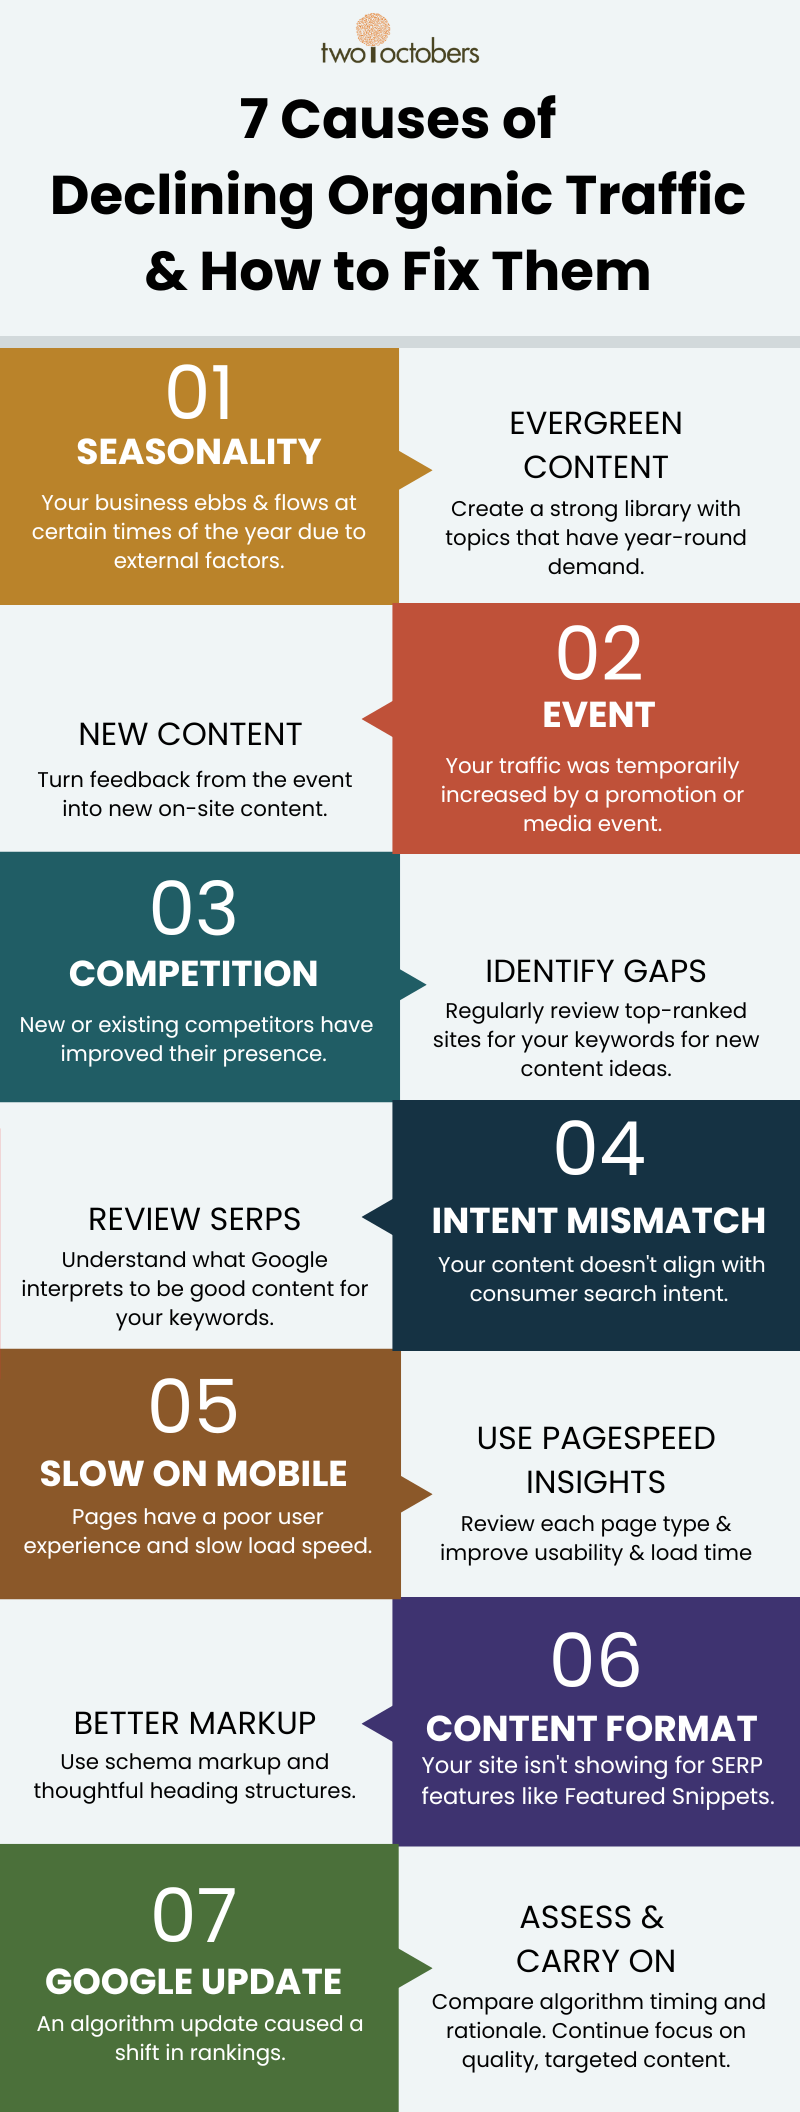 An infographic calls out 7 reasons a site's organic traffic and rankings may be dropping.